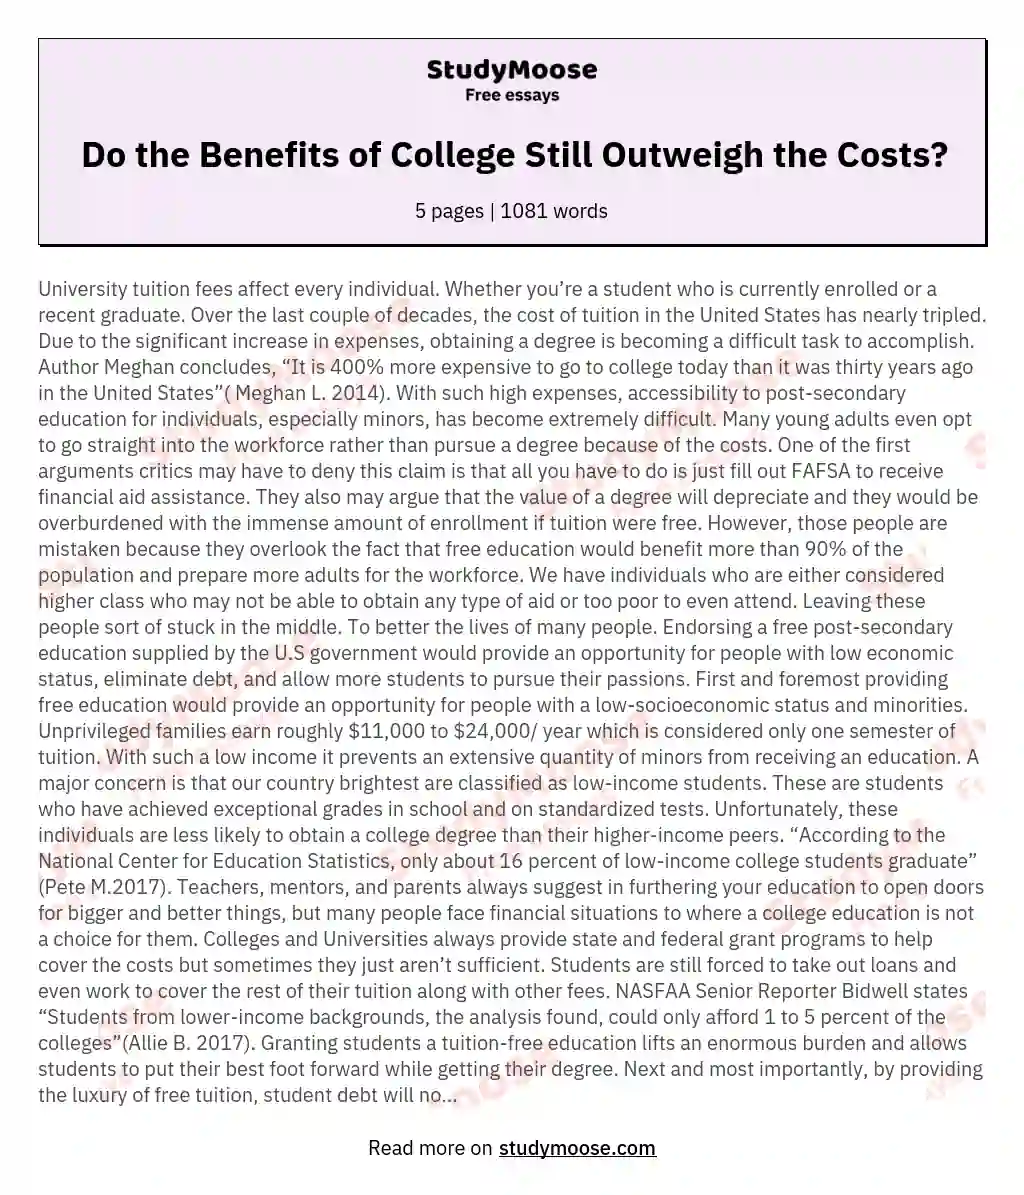 Do the Benefits of College Still Outweigh the Costs? essay